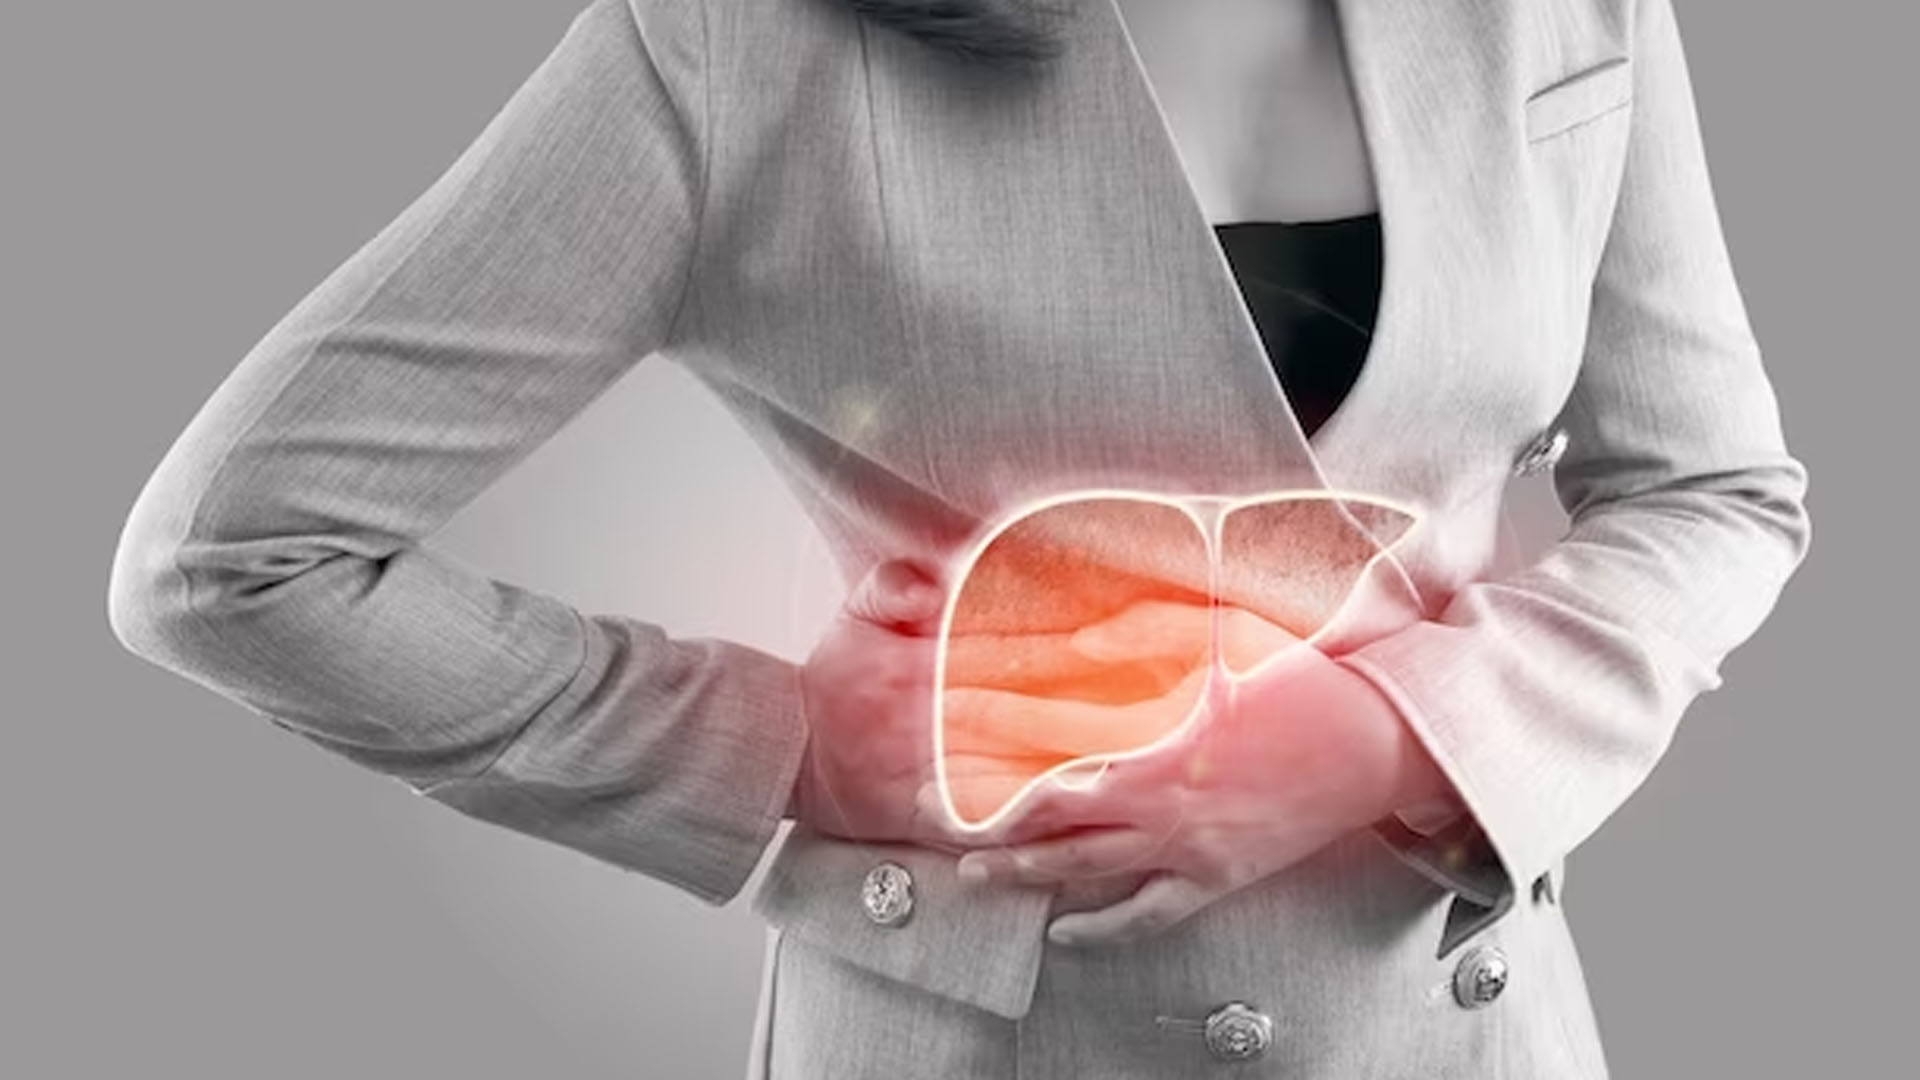 Can Gastroparesis Symptoms Come and Go?